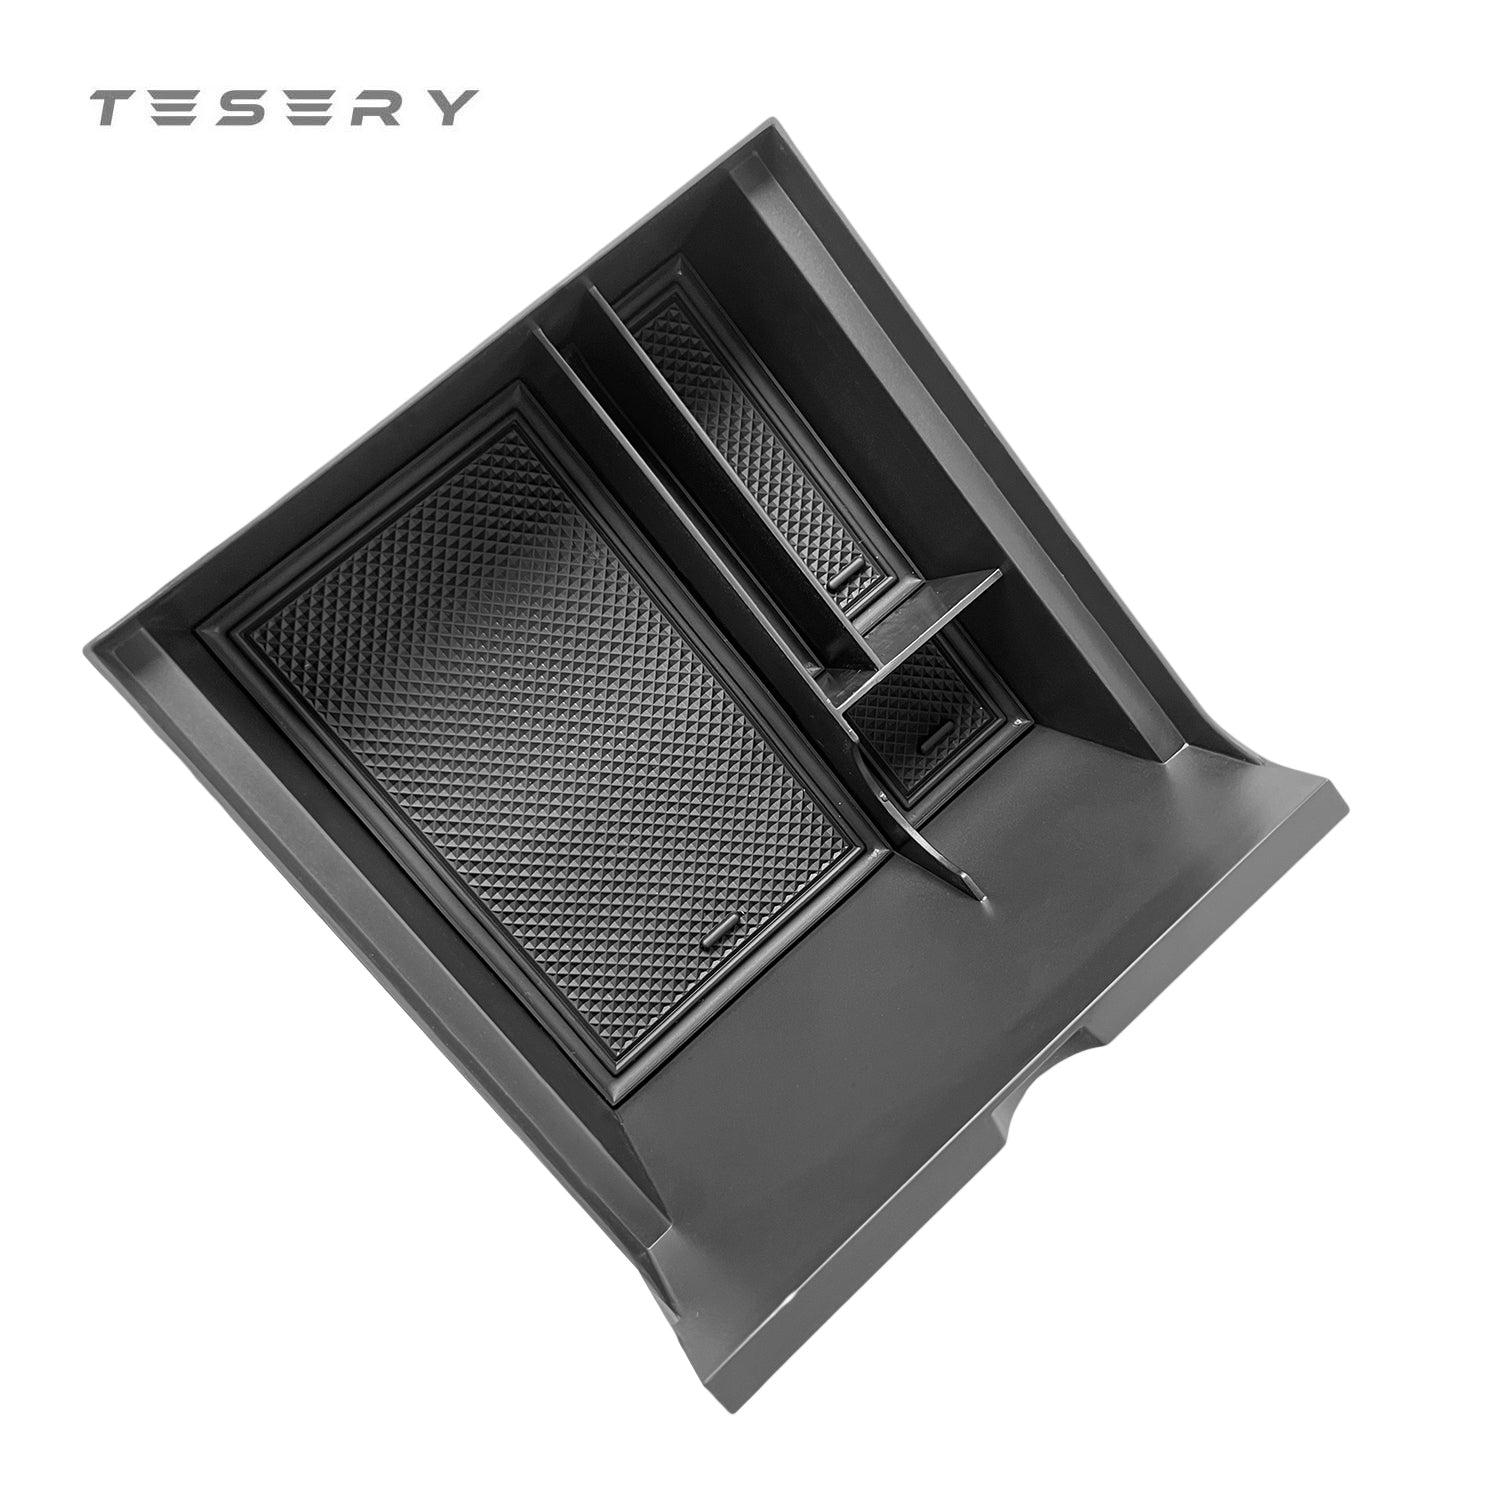 TESERY Official Store Tesla Model 3 / Model Y Center Console Organizer - TESERY Black with Rubber